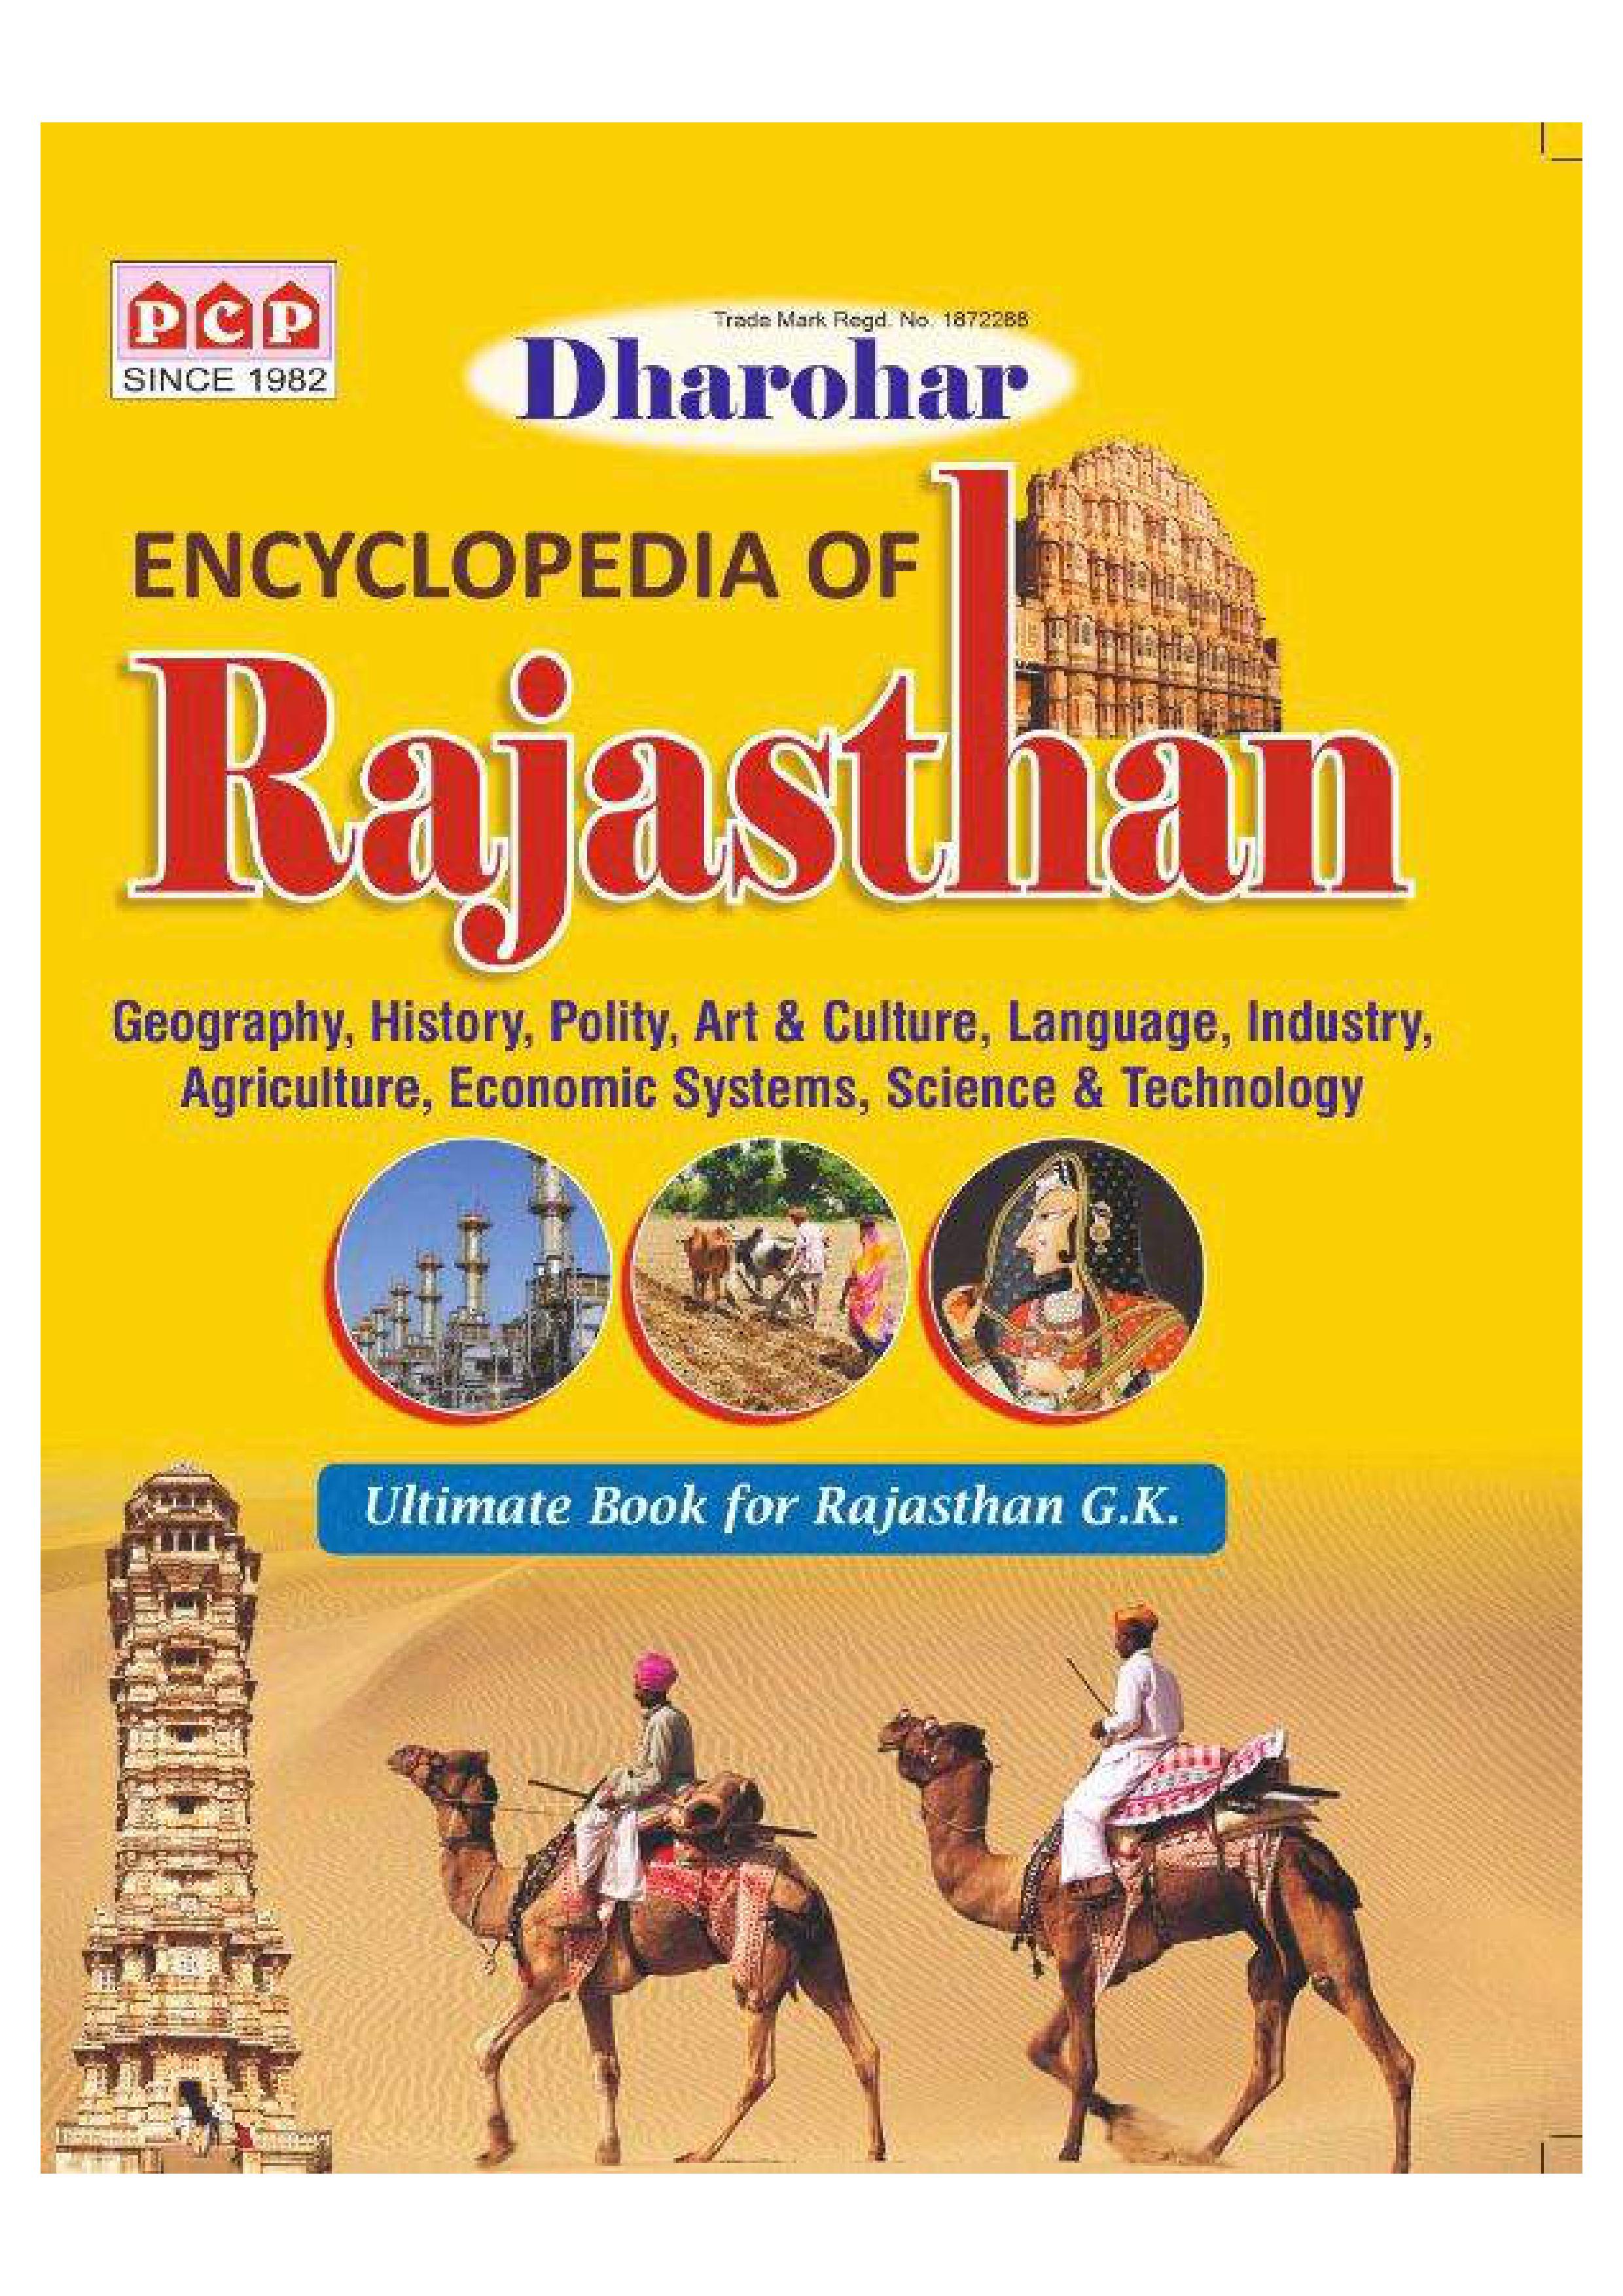 PCP Dharohar Encyclopedia of Rajasthan For All Competitive Exam Latest Edition